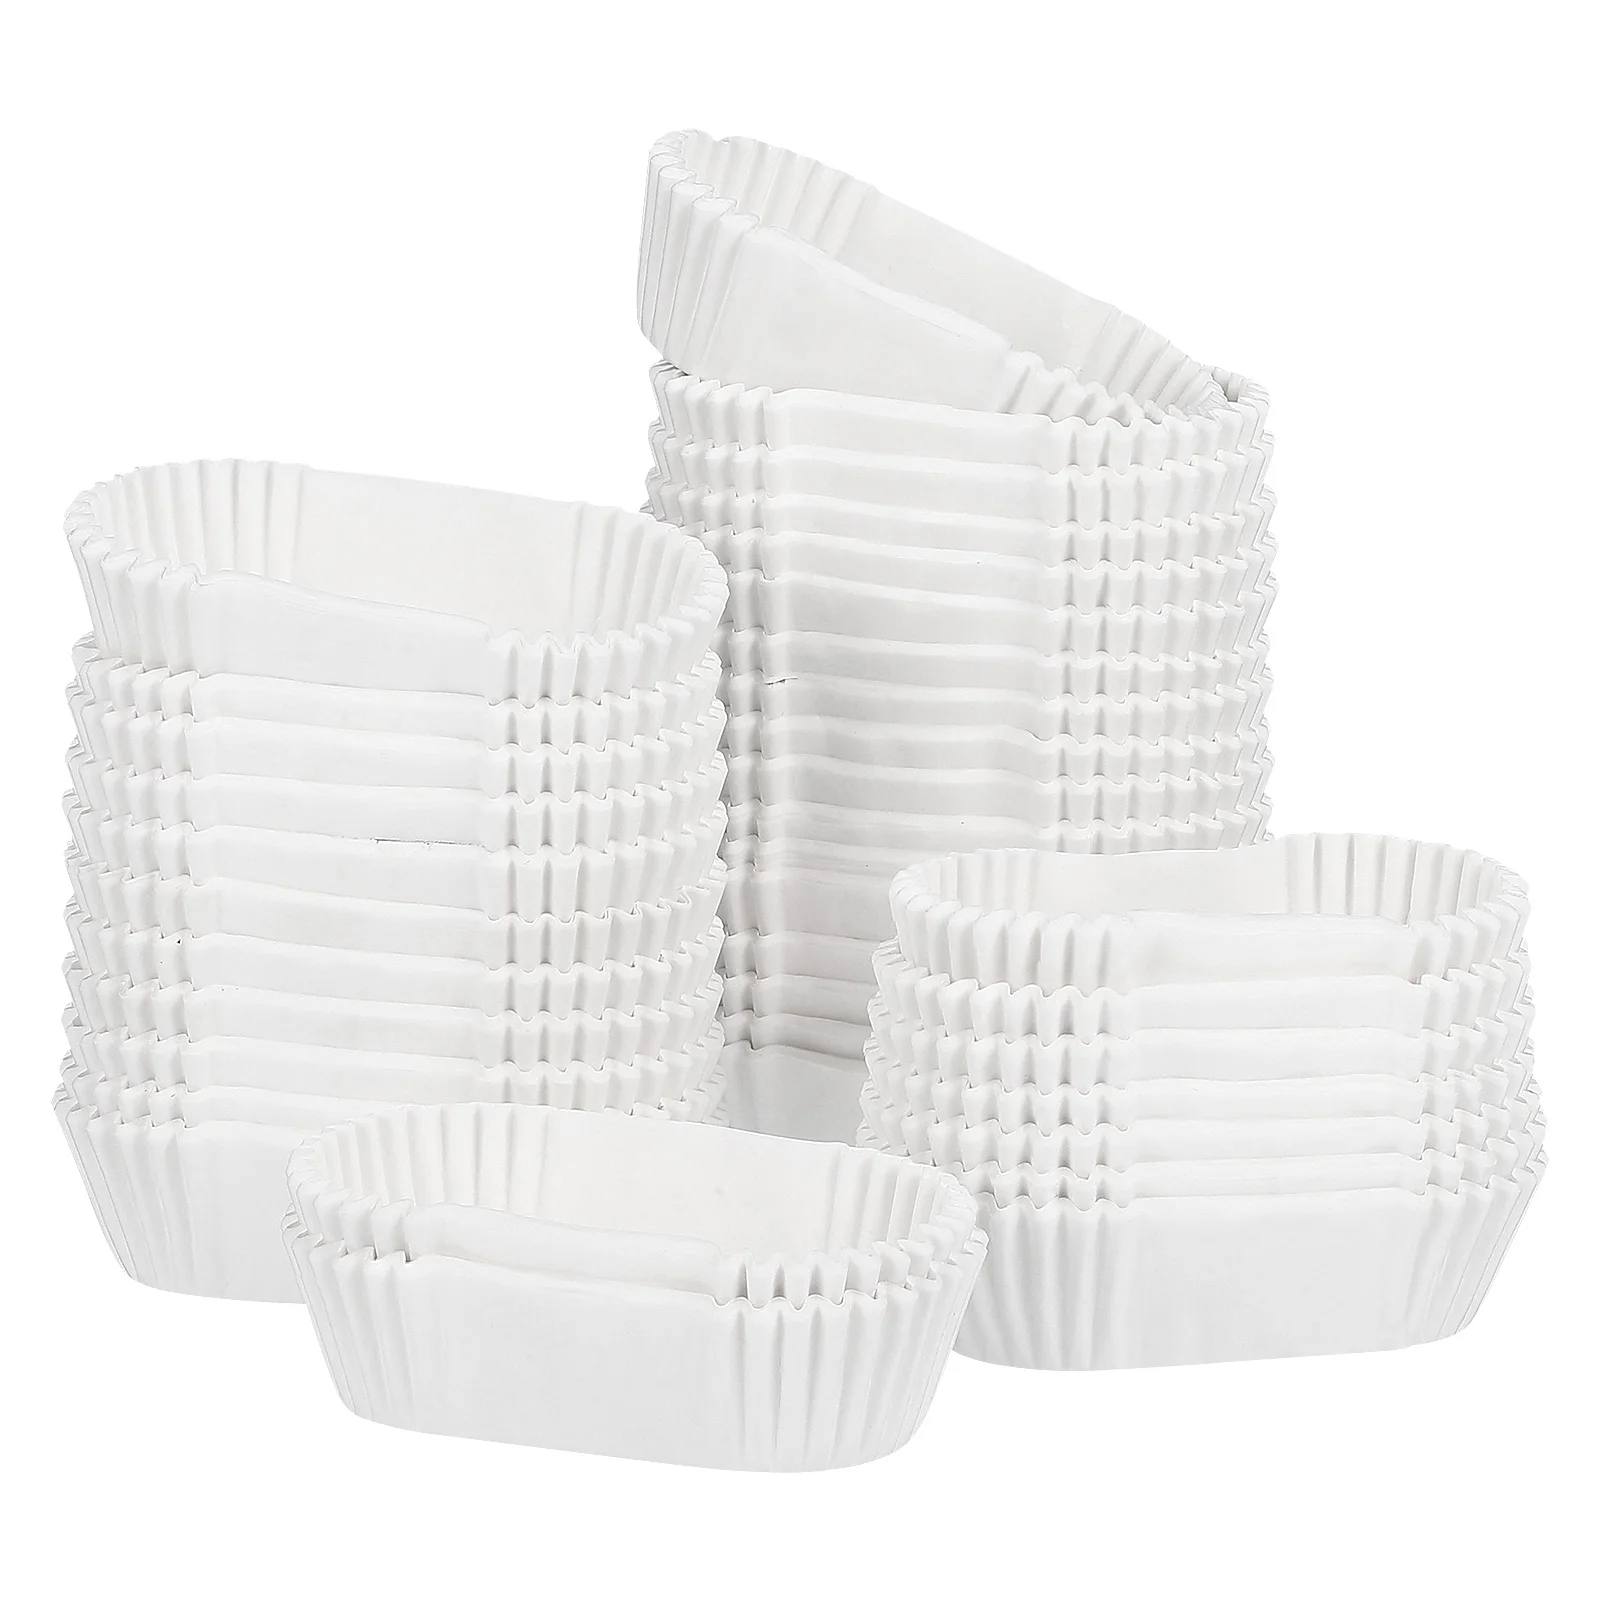 

1000 Pcs Disposable Baking Cups Cake Parchment Bread Paper Tray Wraps Grease Proof Cupcake Liners Oval Form for cupcakes